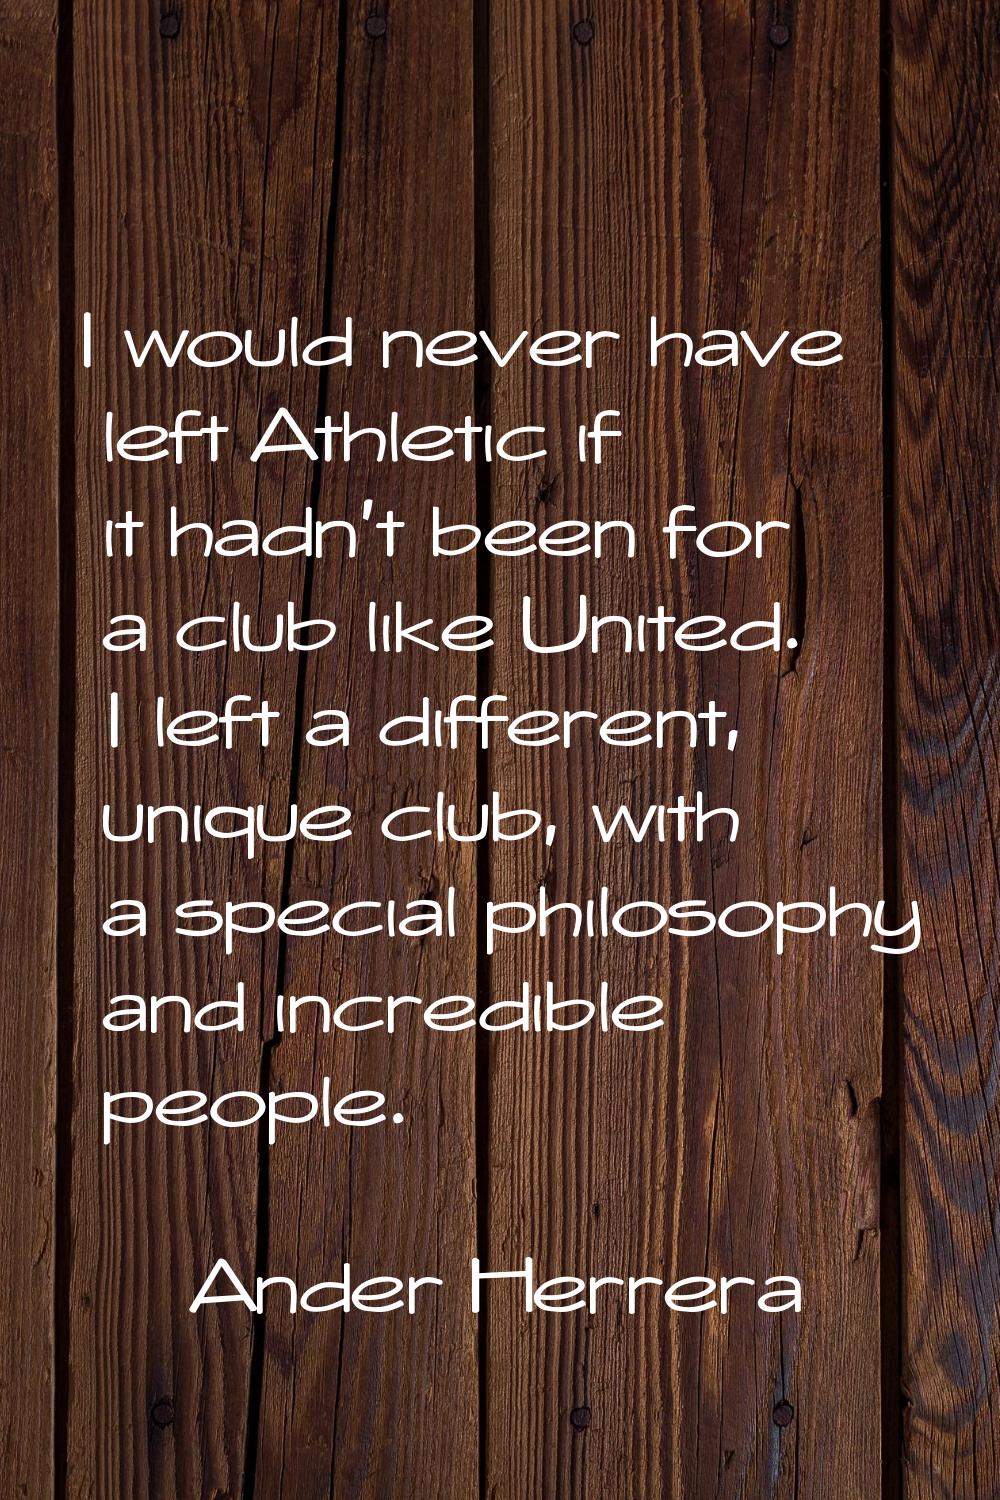 I would never have left Athletic if it hadn't been for a club like United. I left a different, uniq